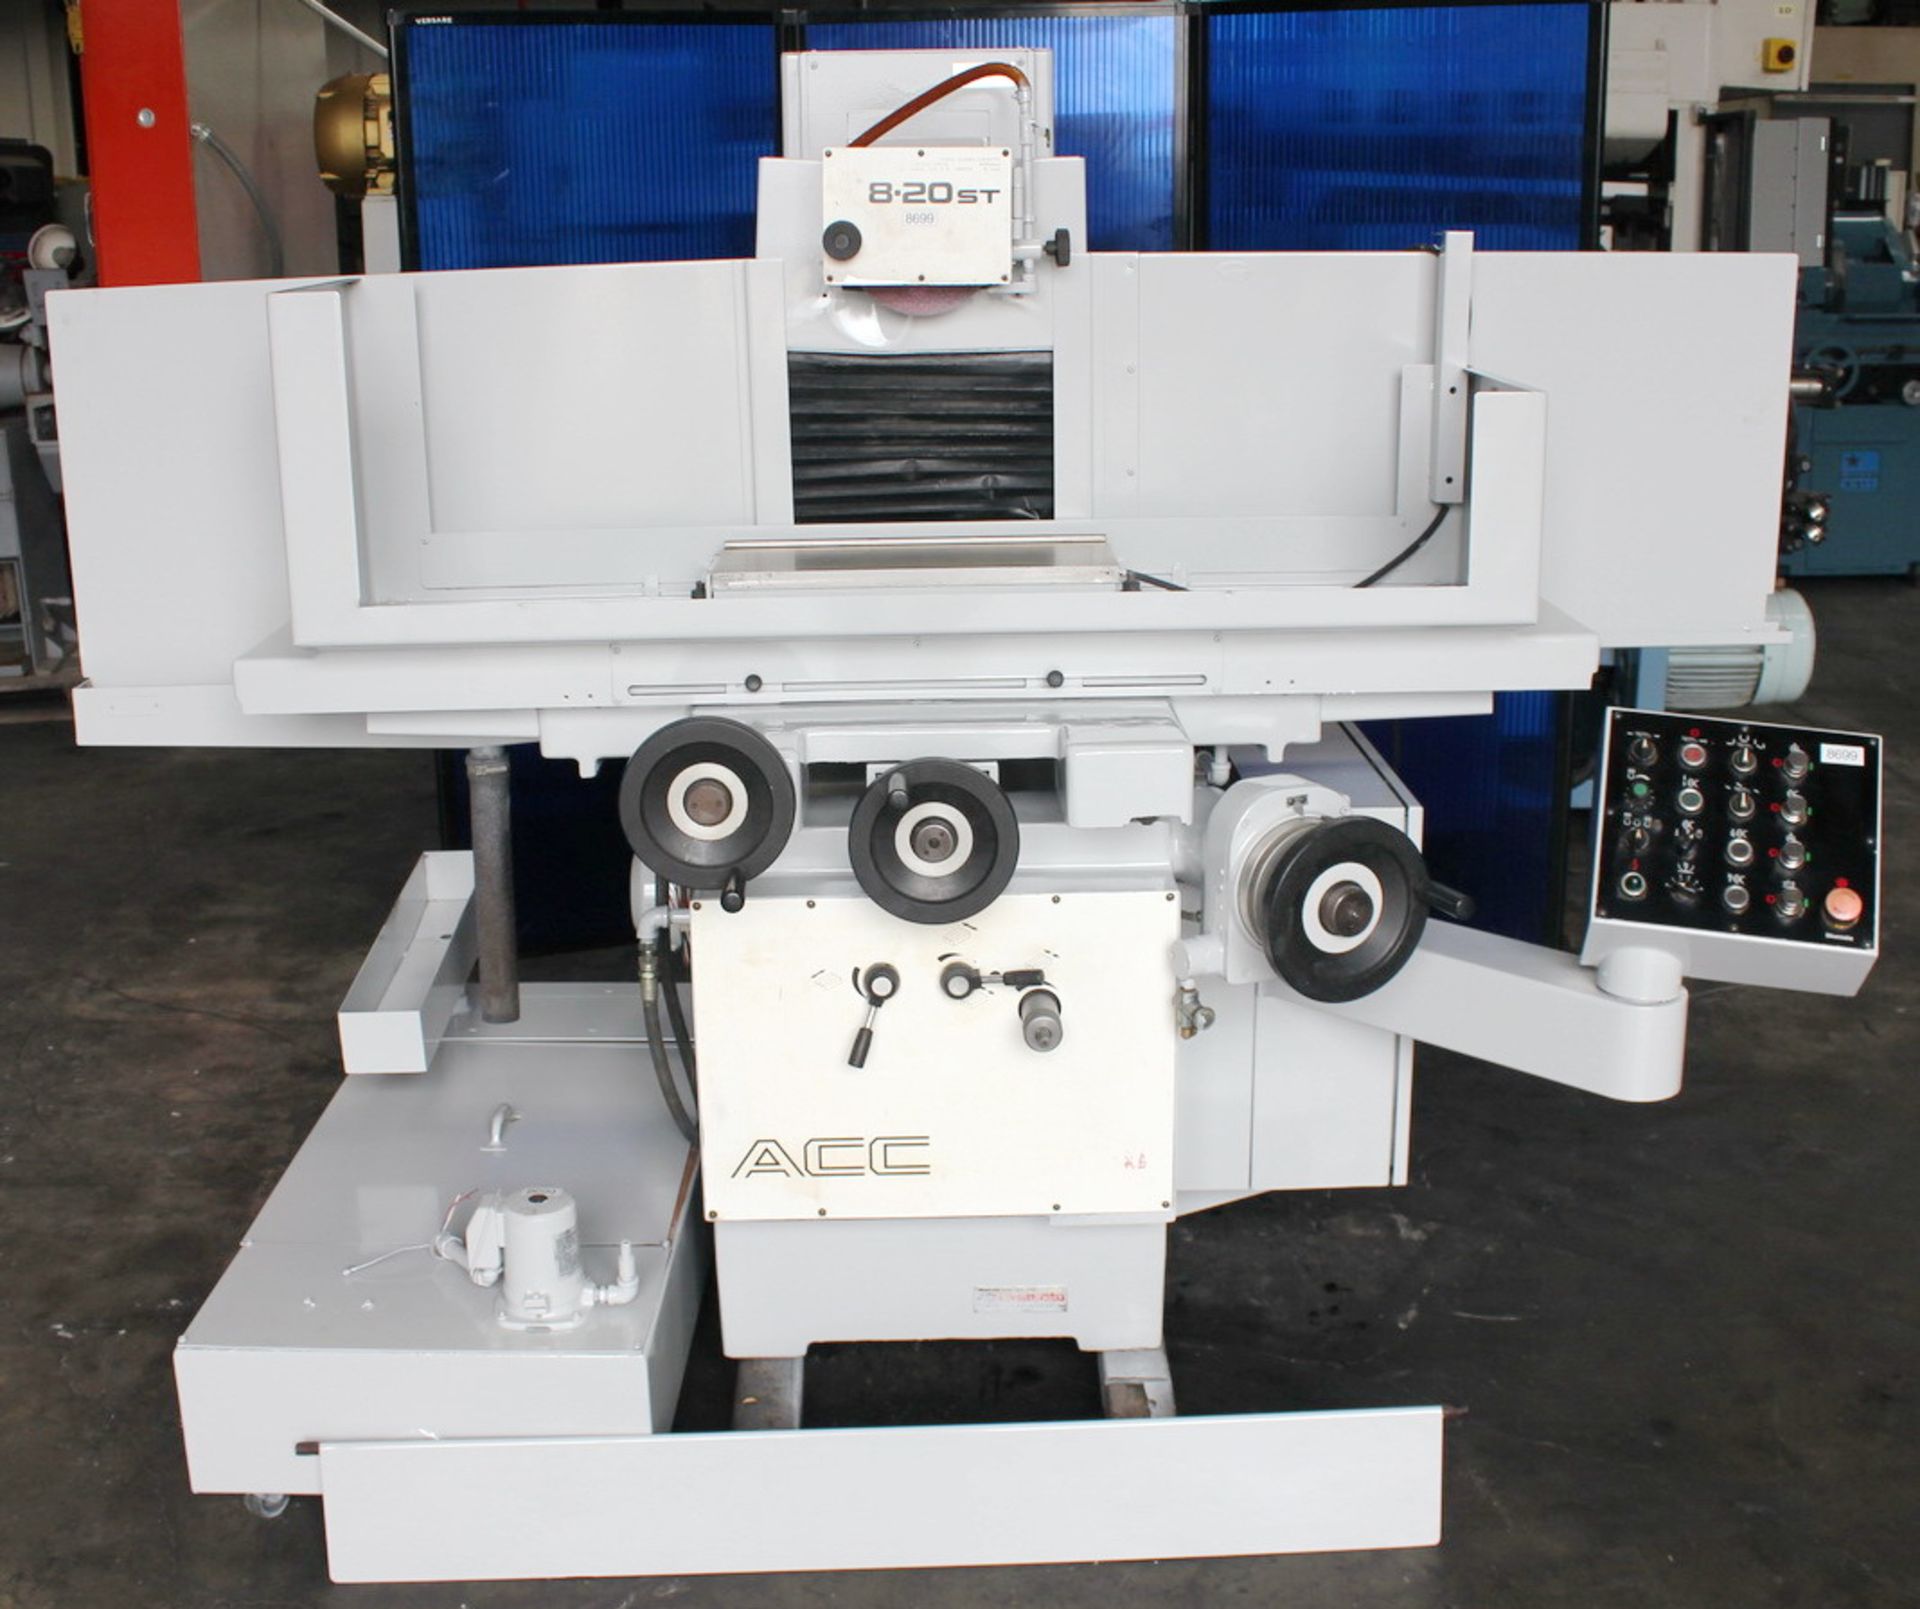 Okamoto Automatic Surface Grinder | 8" x 20", Mdl: ACC-8-20ST, S/N: 82041 - 8699HP